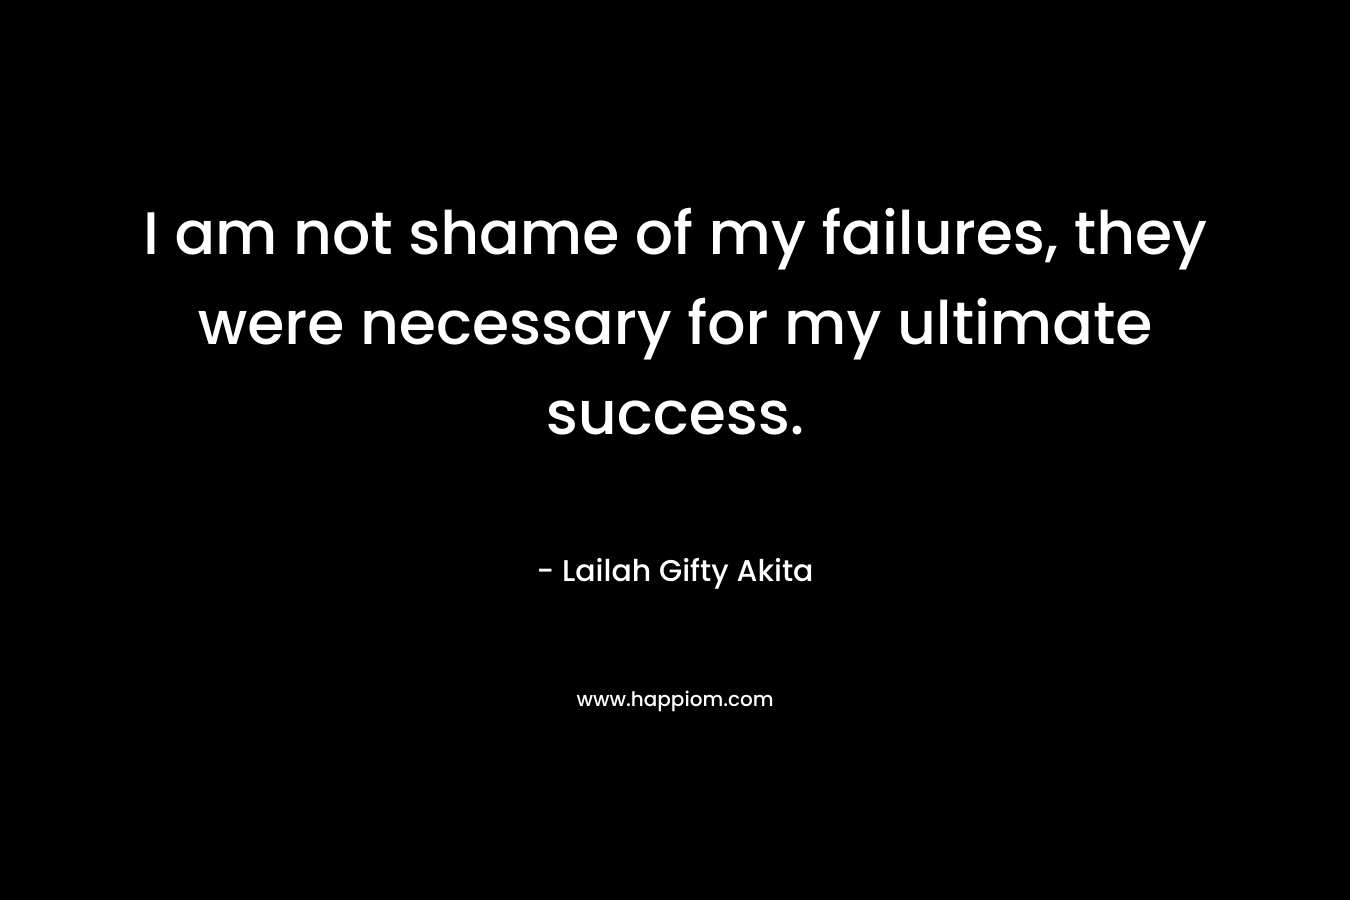 I am not shame of my failures, they were necessary for my ultimate success.